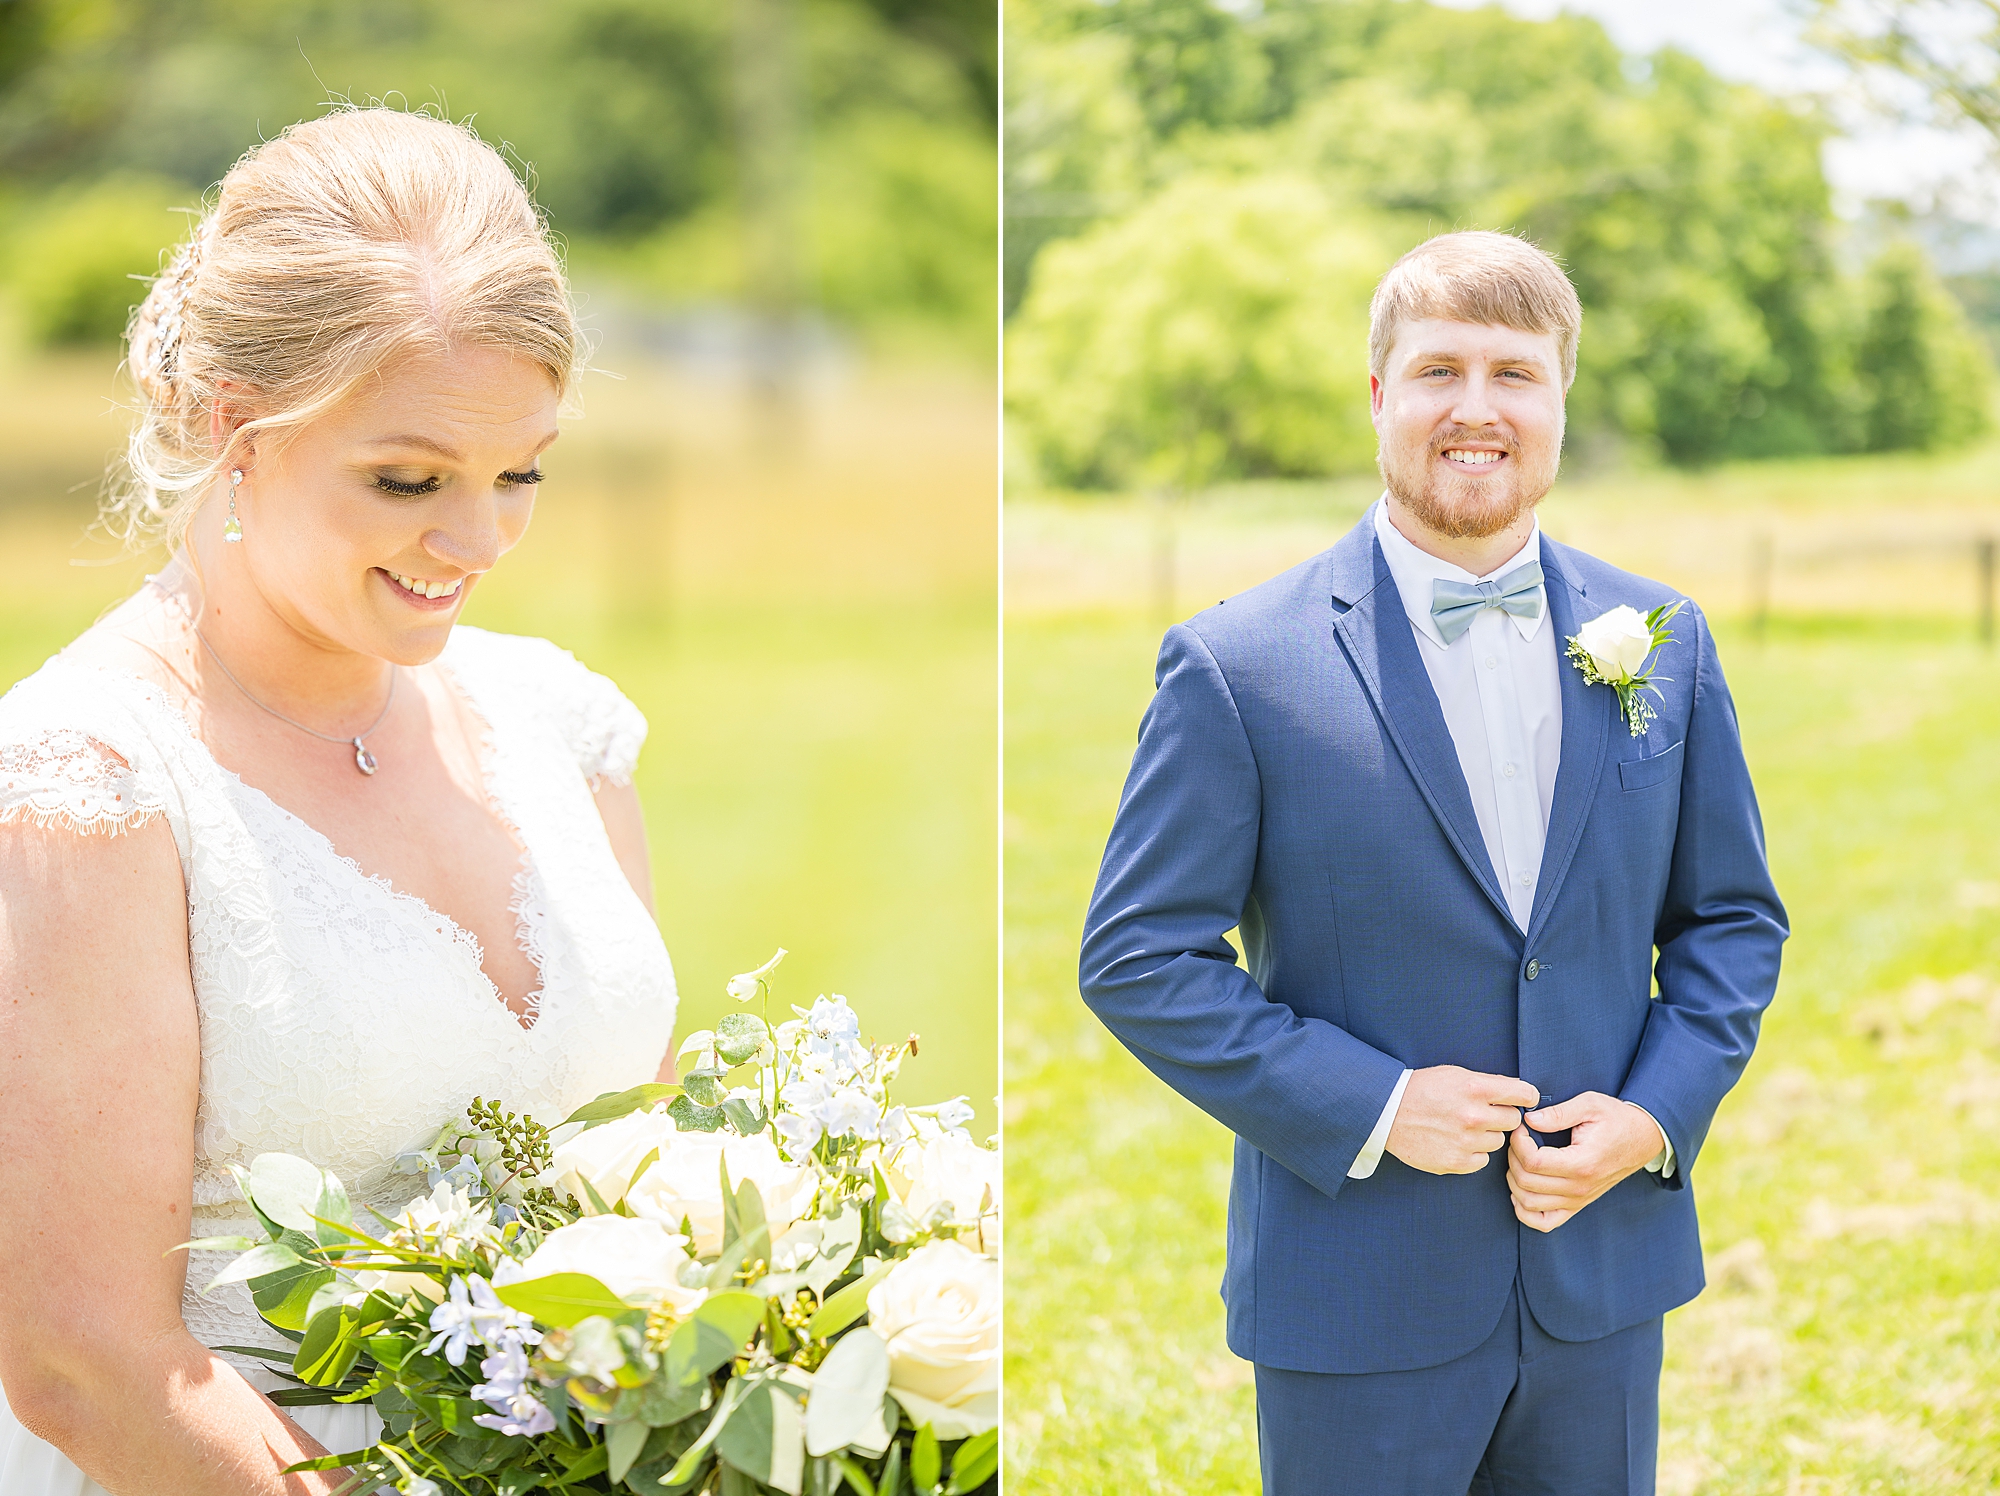 portraits of bride and groom on wedding day